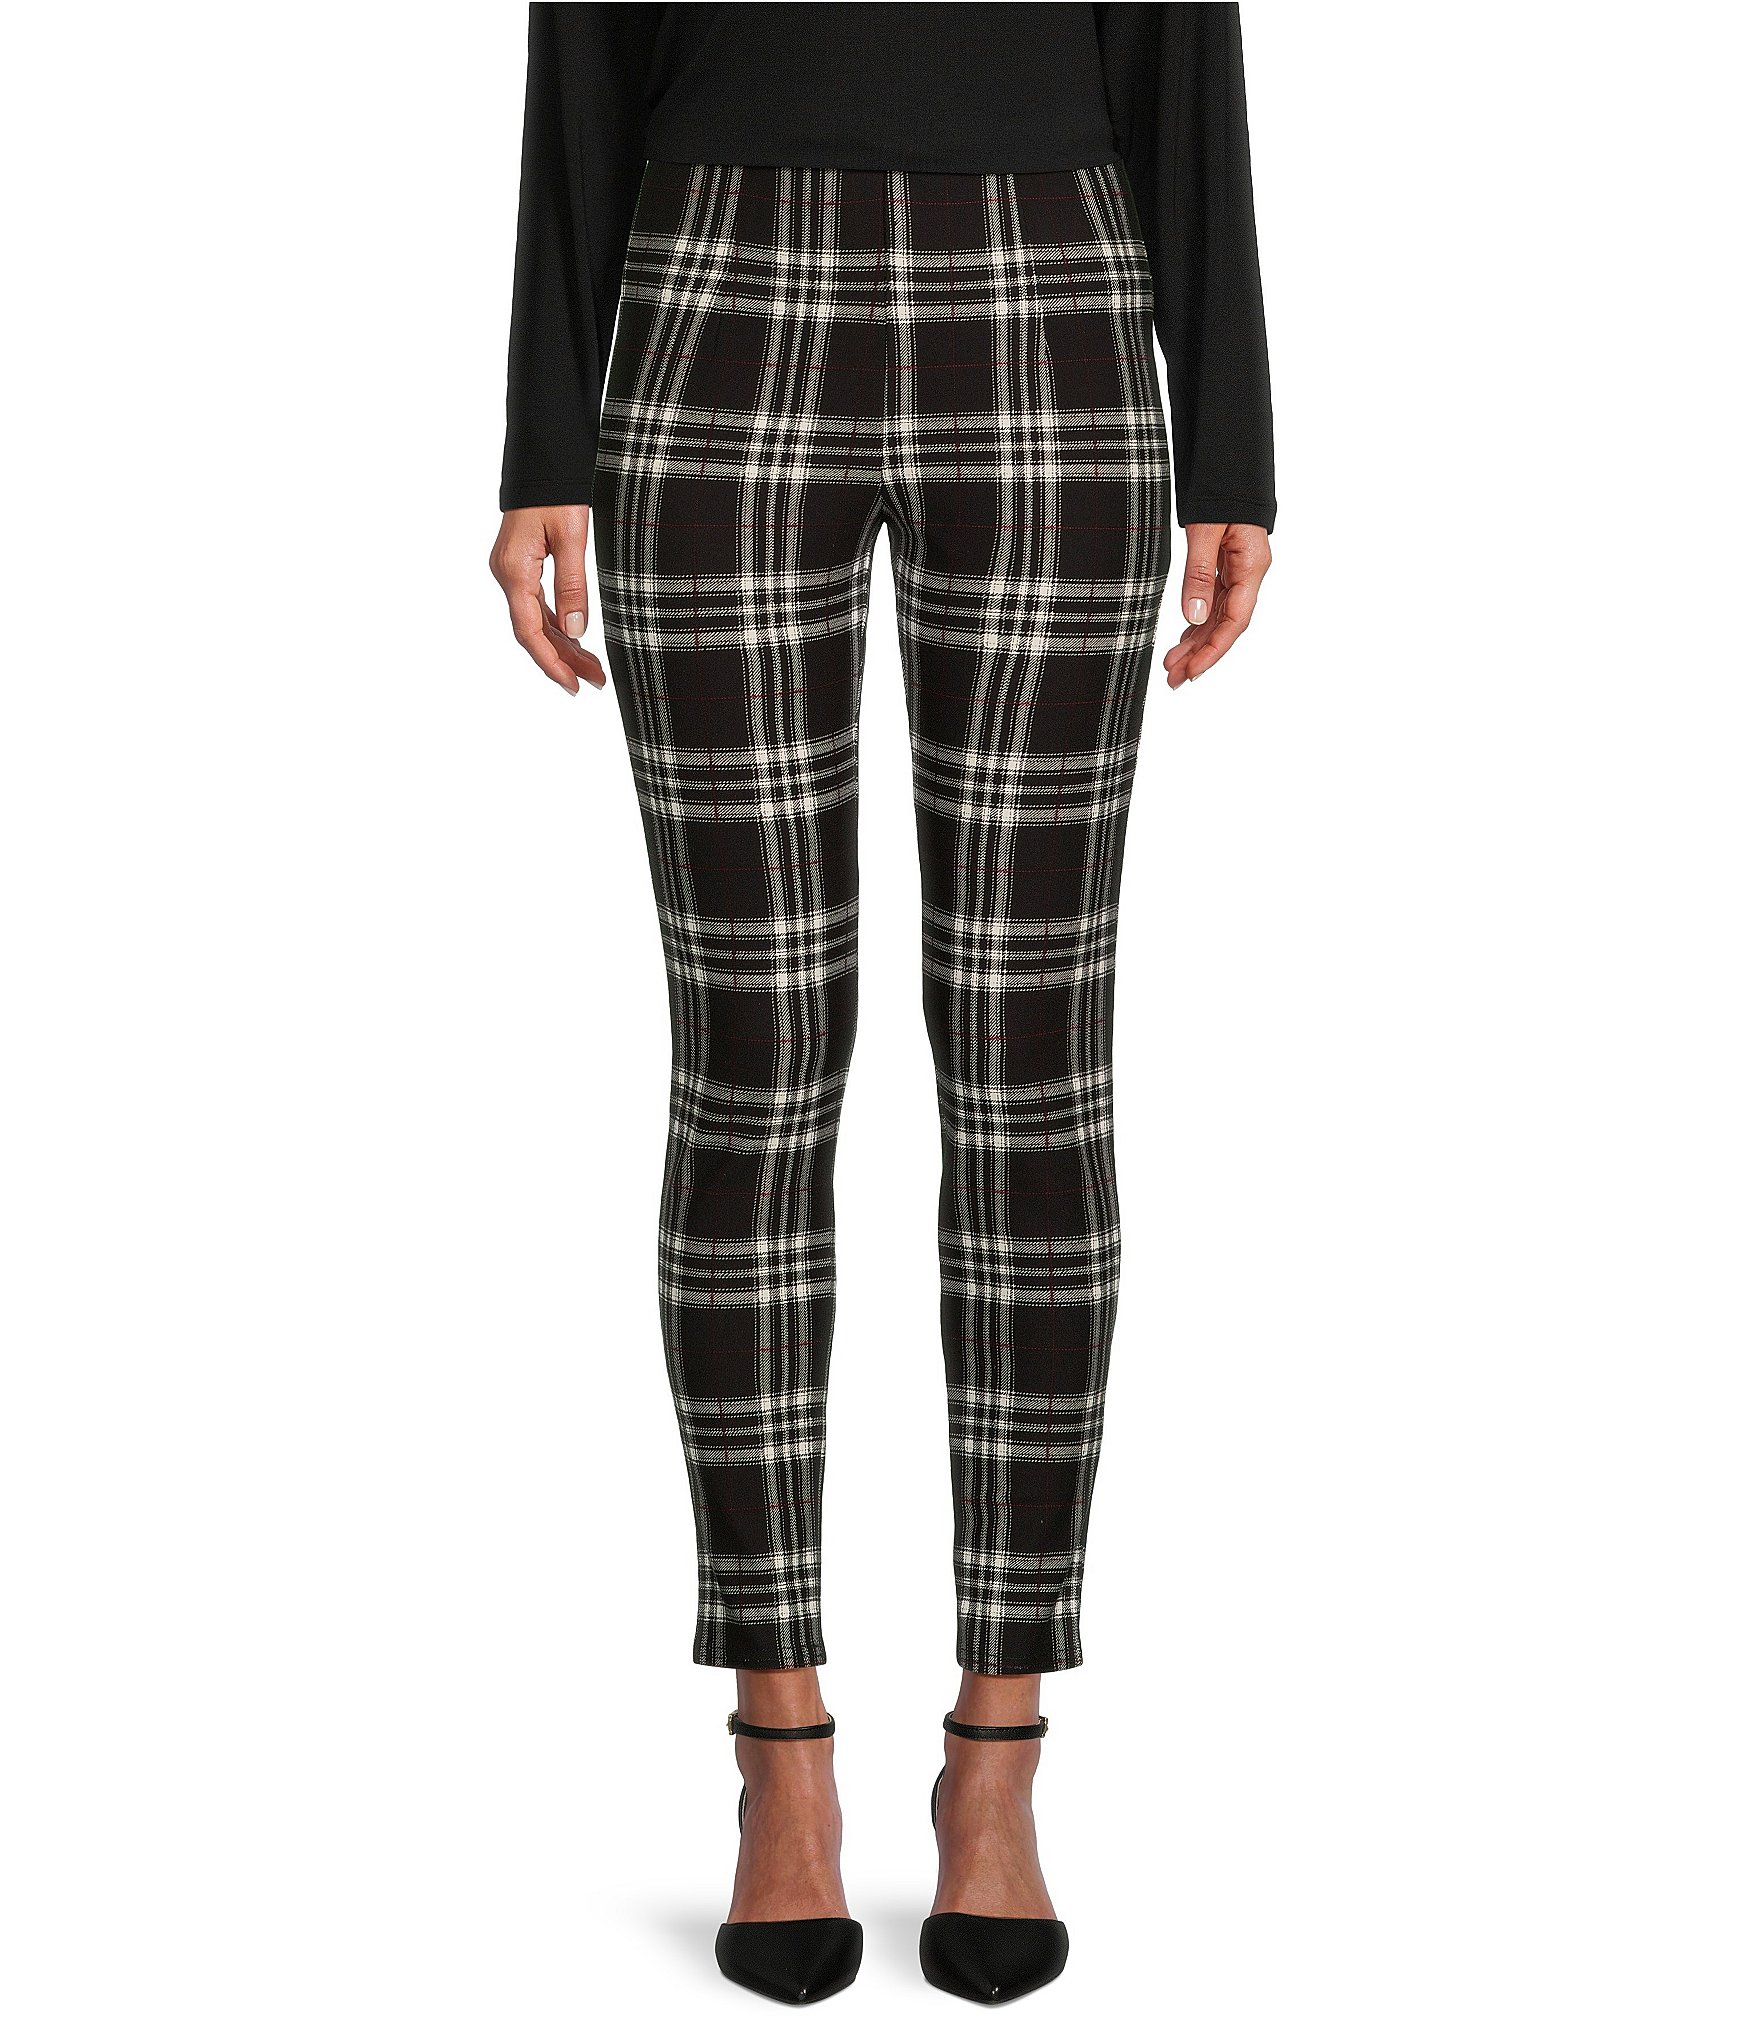 Diamond Plaid Pattern Leggings for Sale by Rell1970